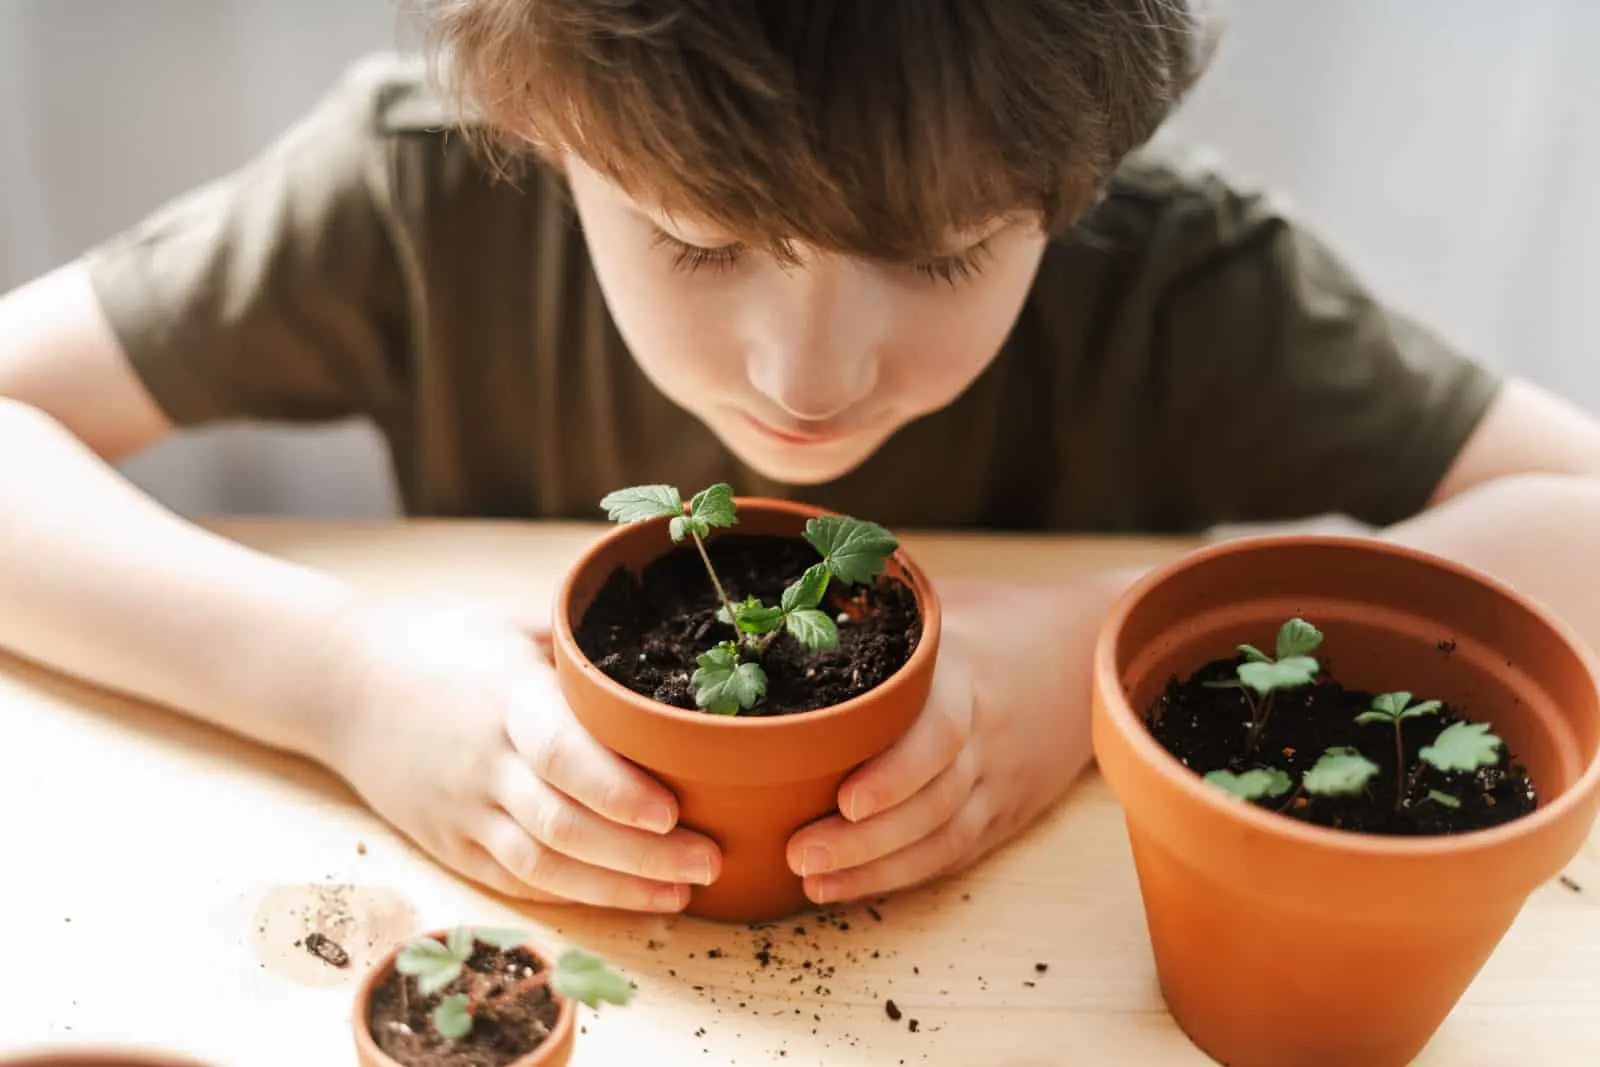 boy gardener taking care and transplanting strawberries sprout plant into a new ceramic pot